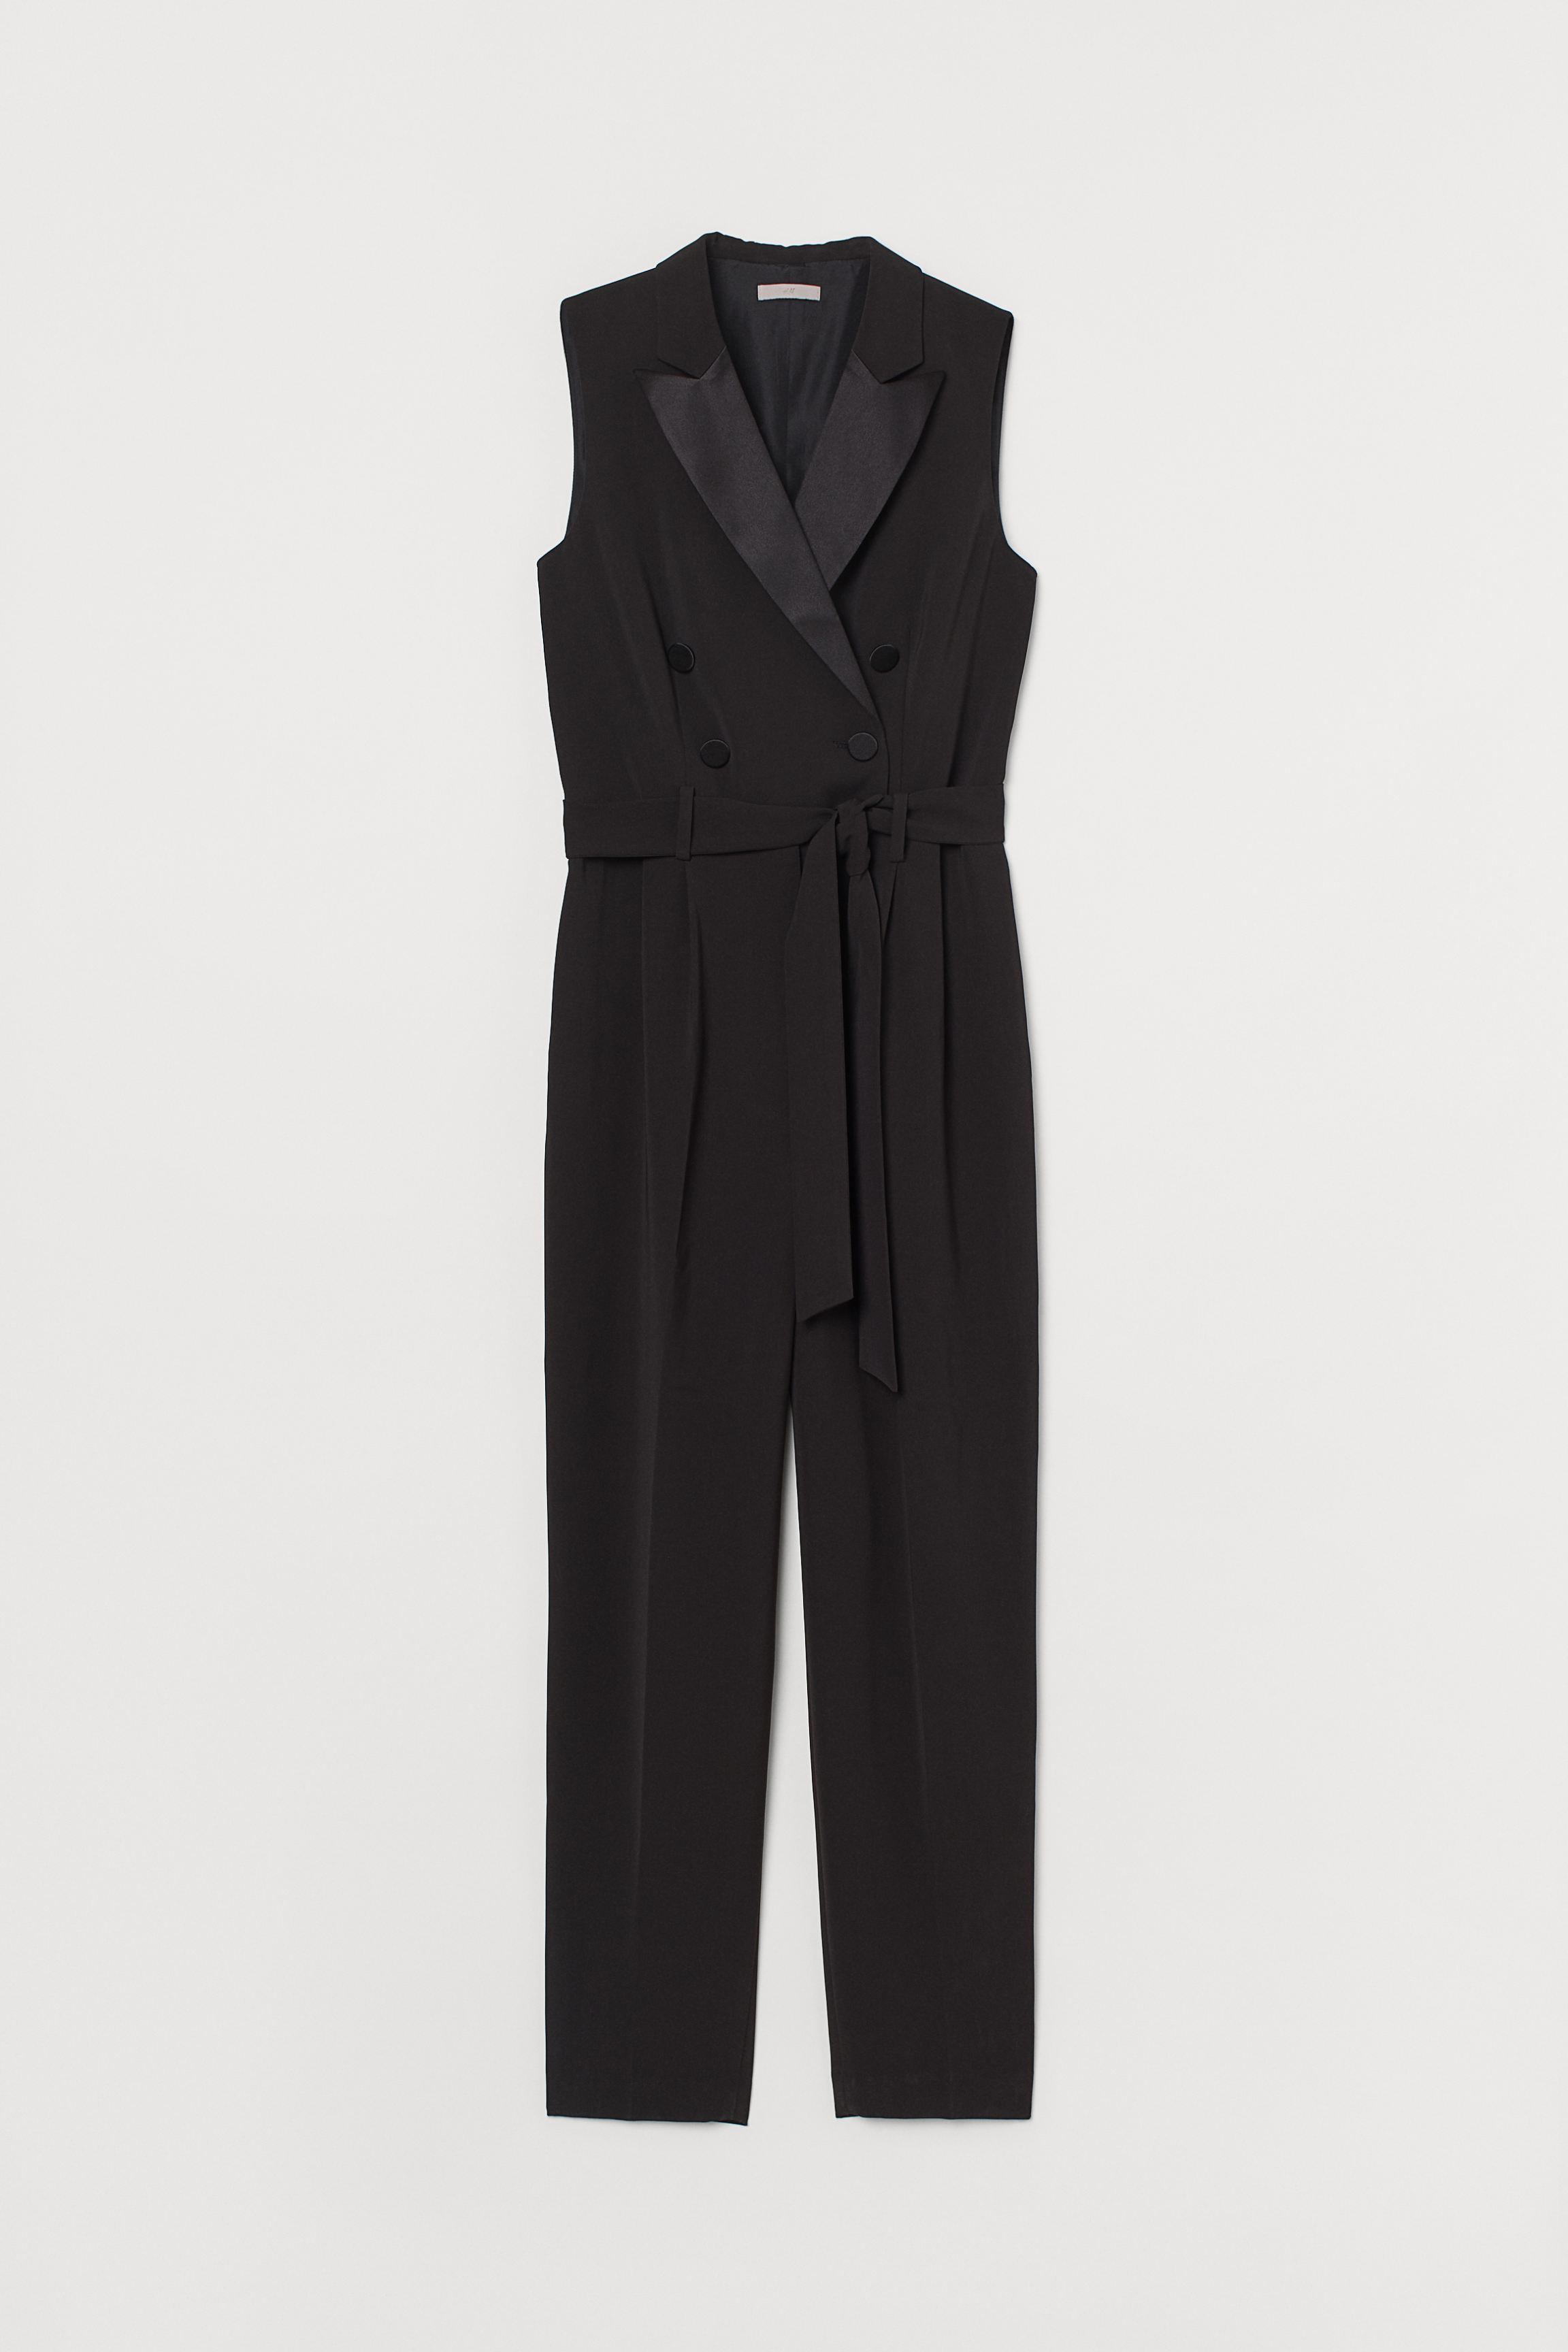 H&M Satin Double-breasted Jumpsuit in Black | Lyst